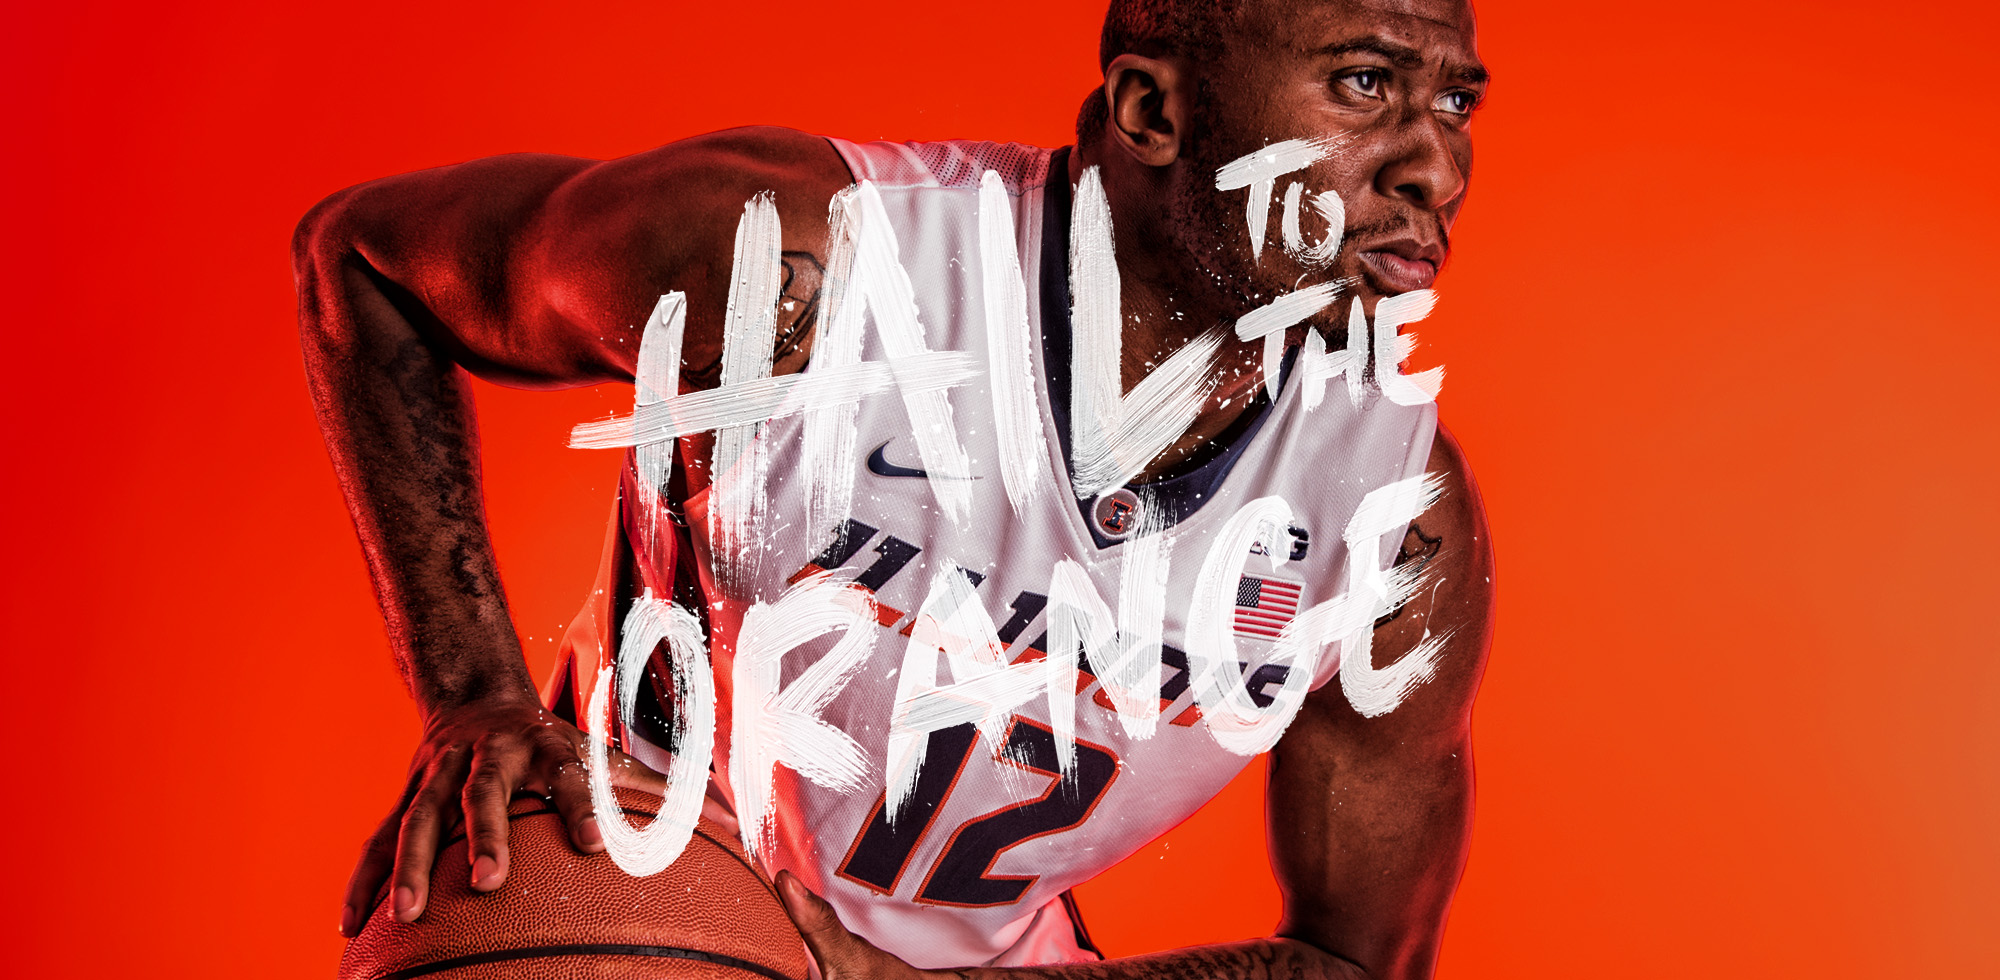 Men's Basketball Poster & Wallpaper Now Available of Illinois Athletics